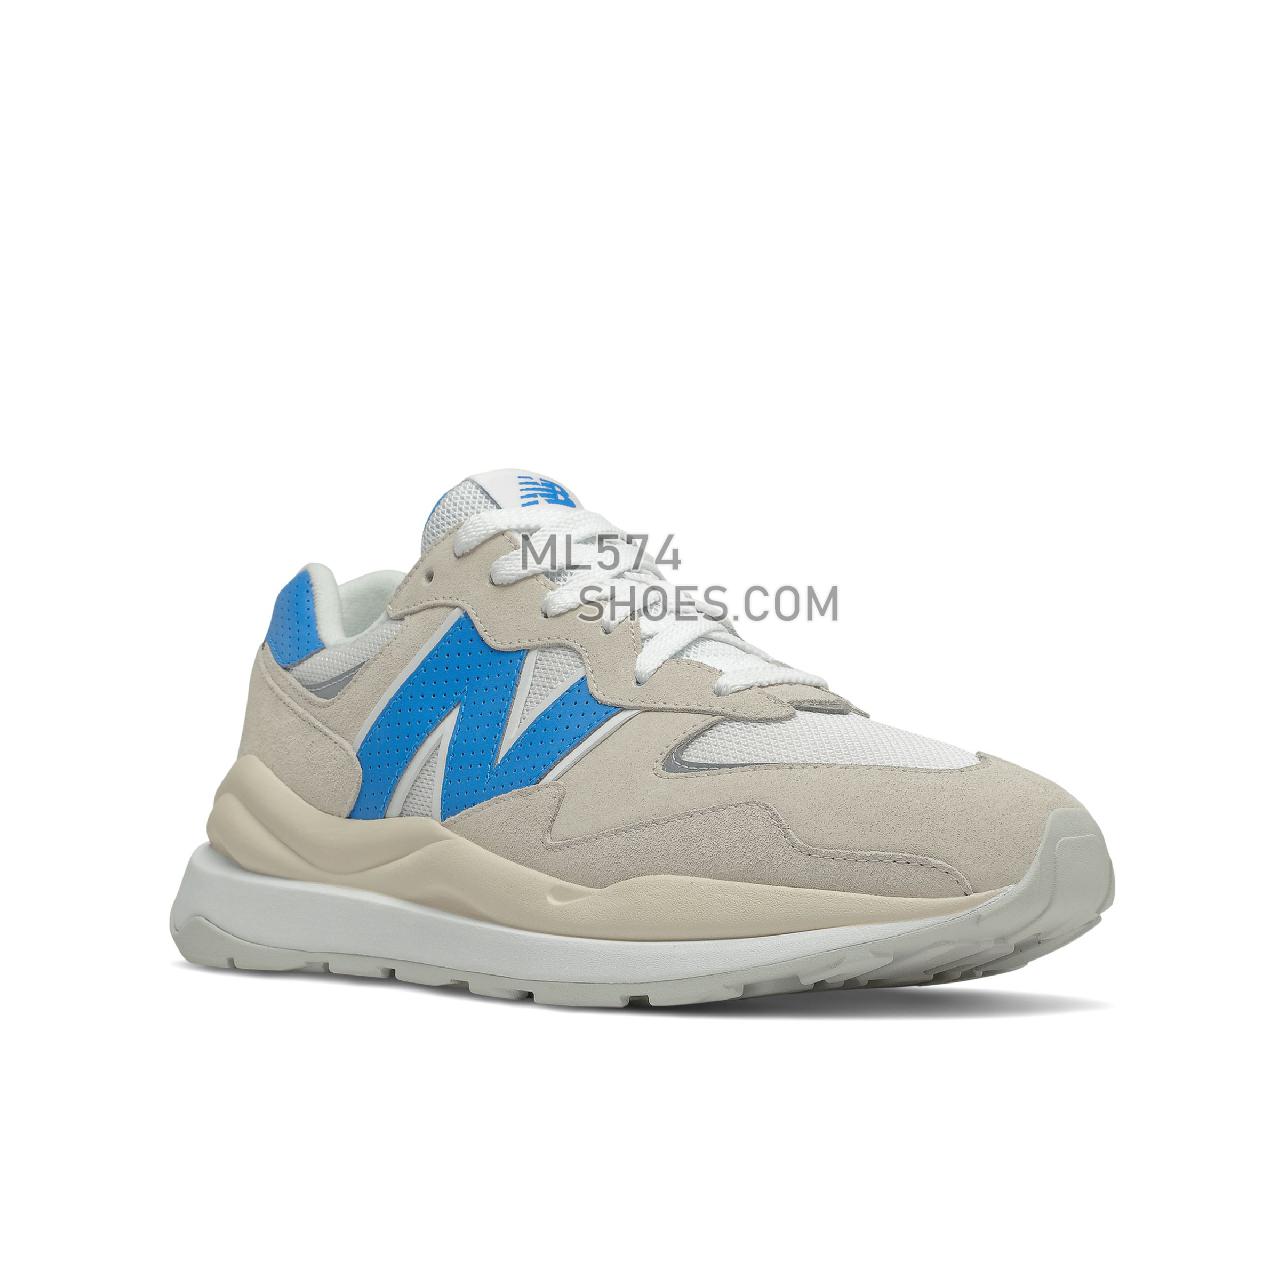 New Balance 57/40 - Men's Sport Style Sneakers - Sea Salt with Helium - M5740SA1